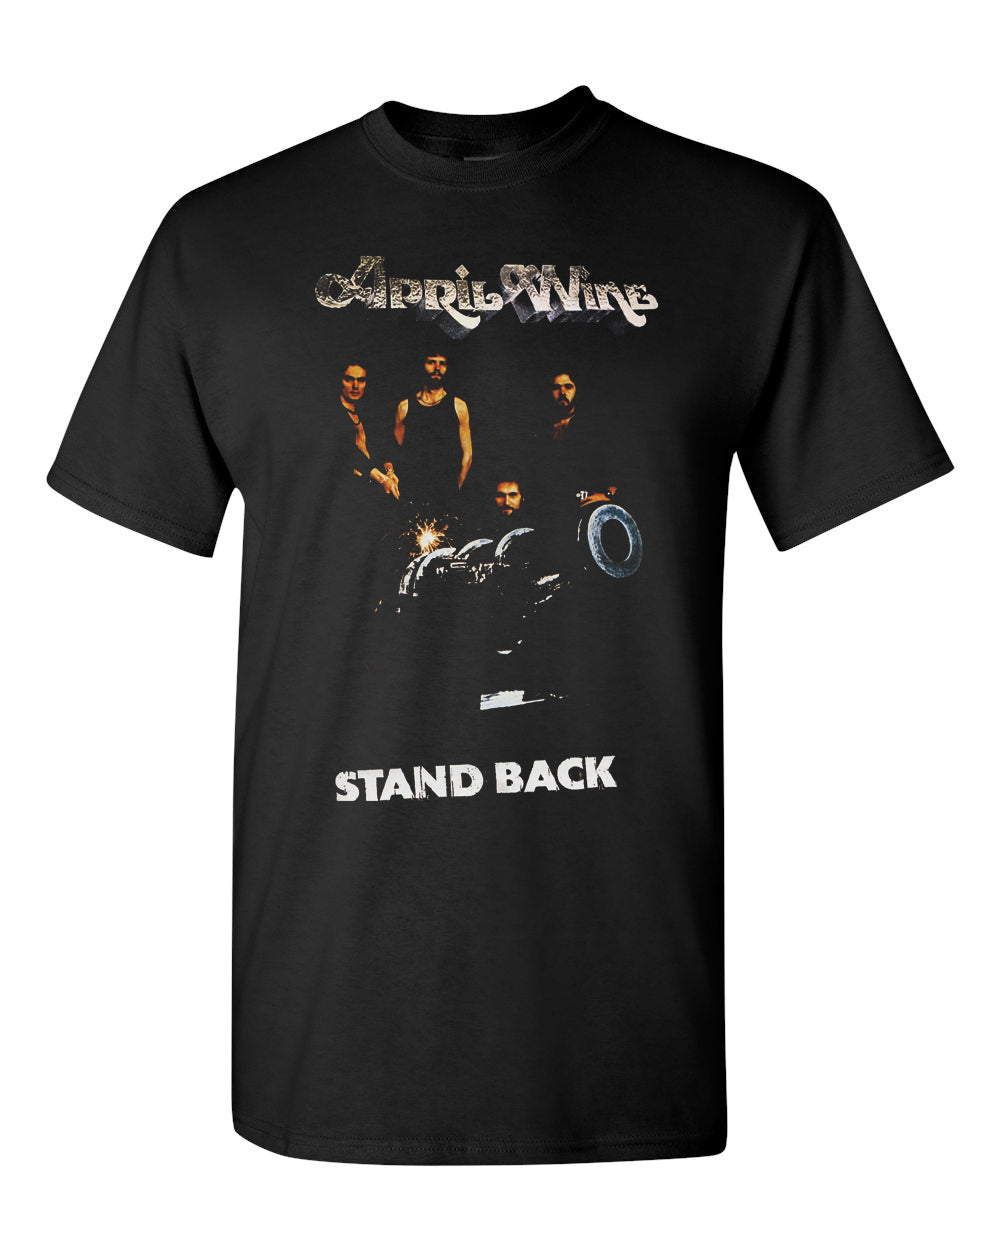 *NEW* April Wine - Stand Back T-shirt